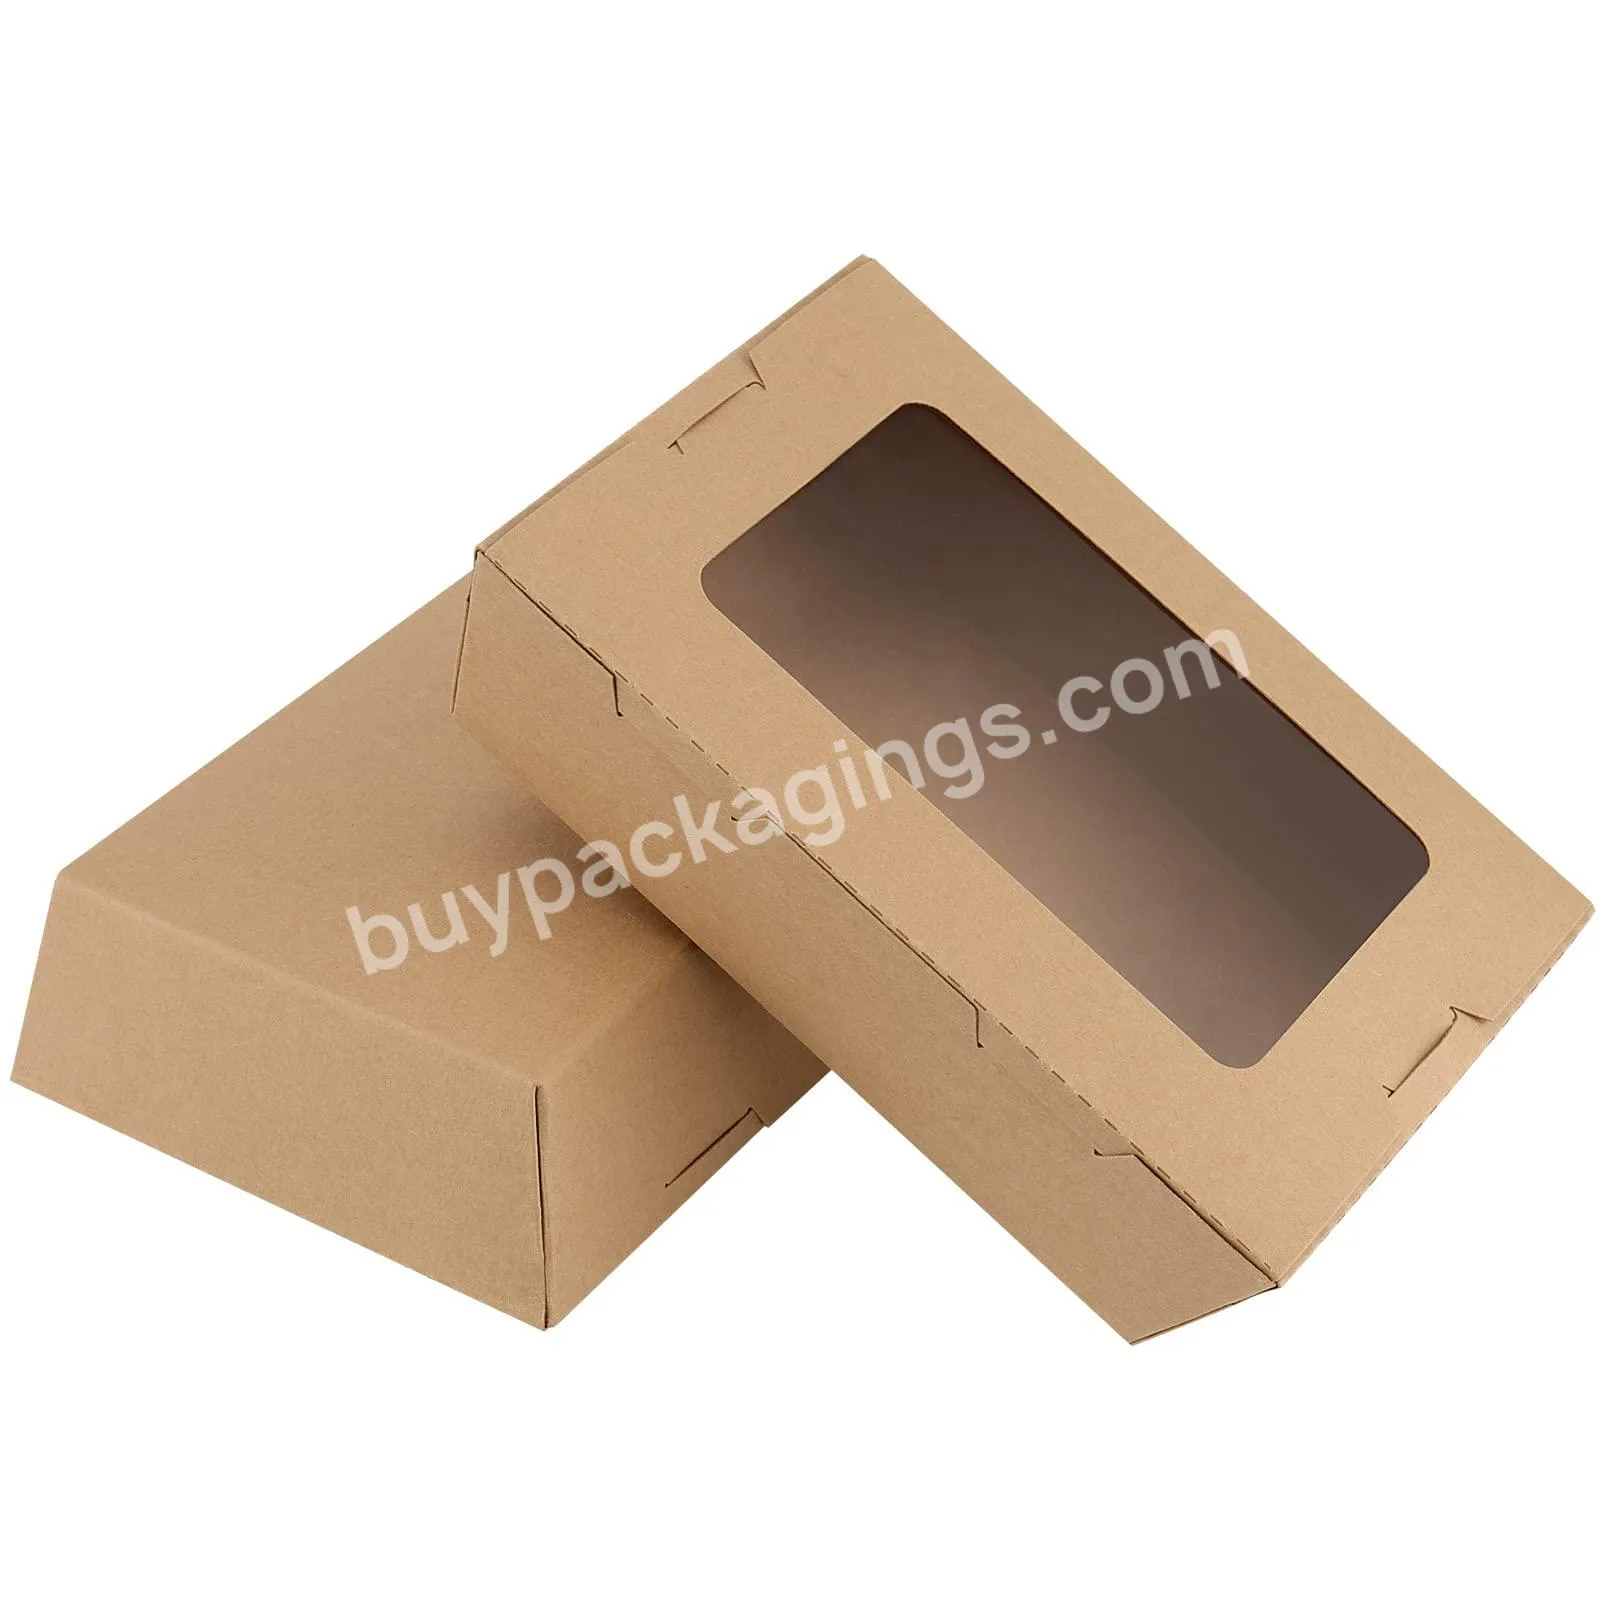 Disposable Foldable Flat Paper Box For Takeaway Food With Transparent Window Kraft Waterproof Flat Box - Buy Disposable Foldable Flat Paper Box For Takeaway Food With Transparent Window Kraft Waterproof Flat Box,Paper Box With Pvc Window,Disposable K